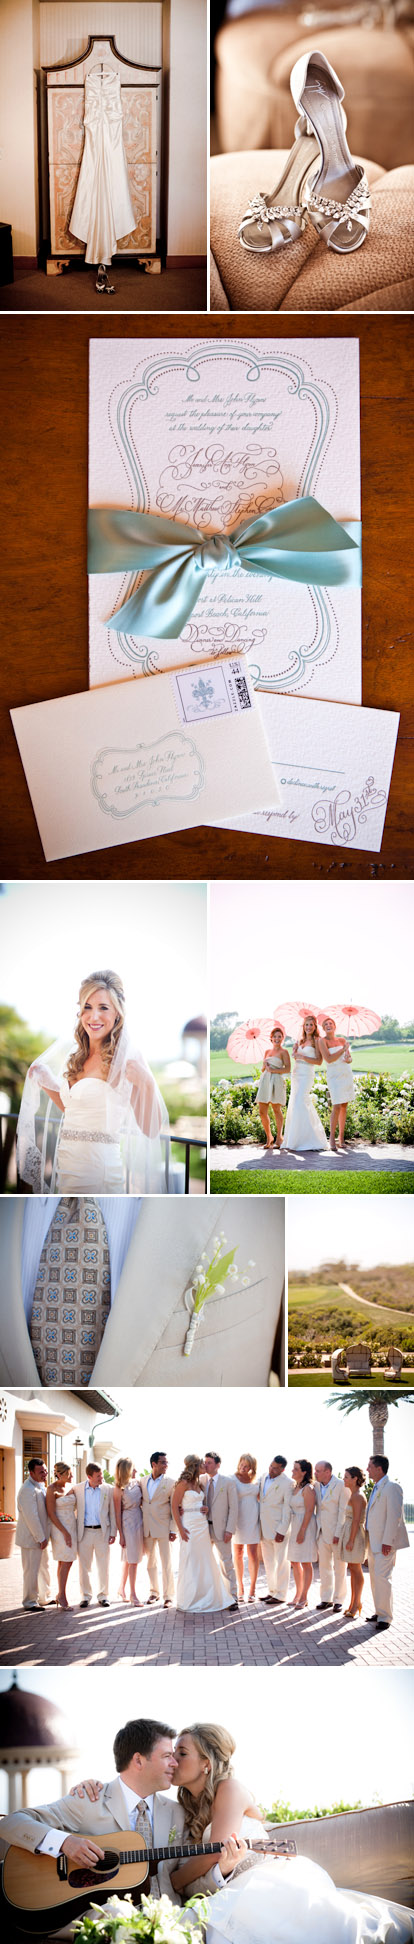 Vintage style Real Wedding by Mindy Weiss at The Resort at Pelican Hill, teal, peach and rose gold wedding color palette, images by Jay Lawrence Goldman